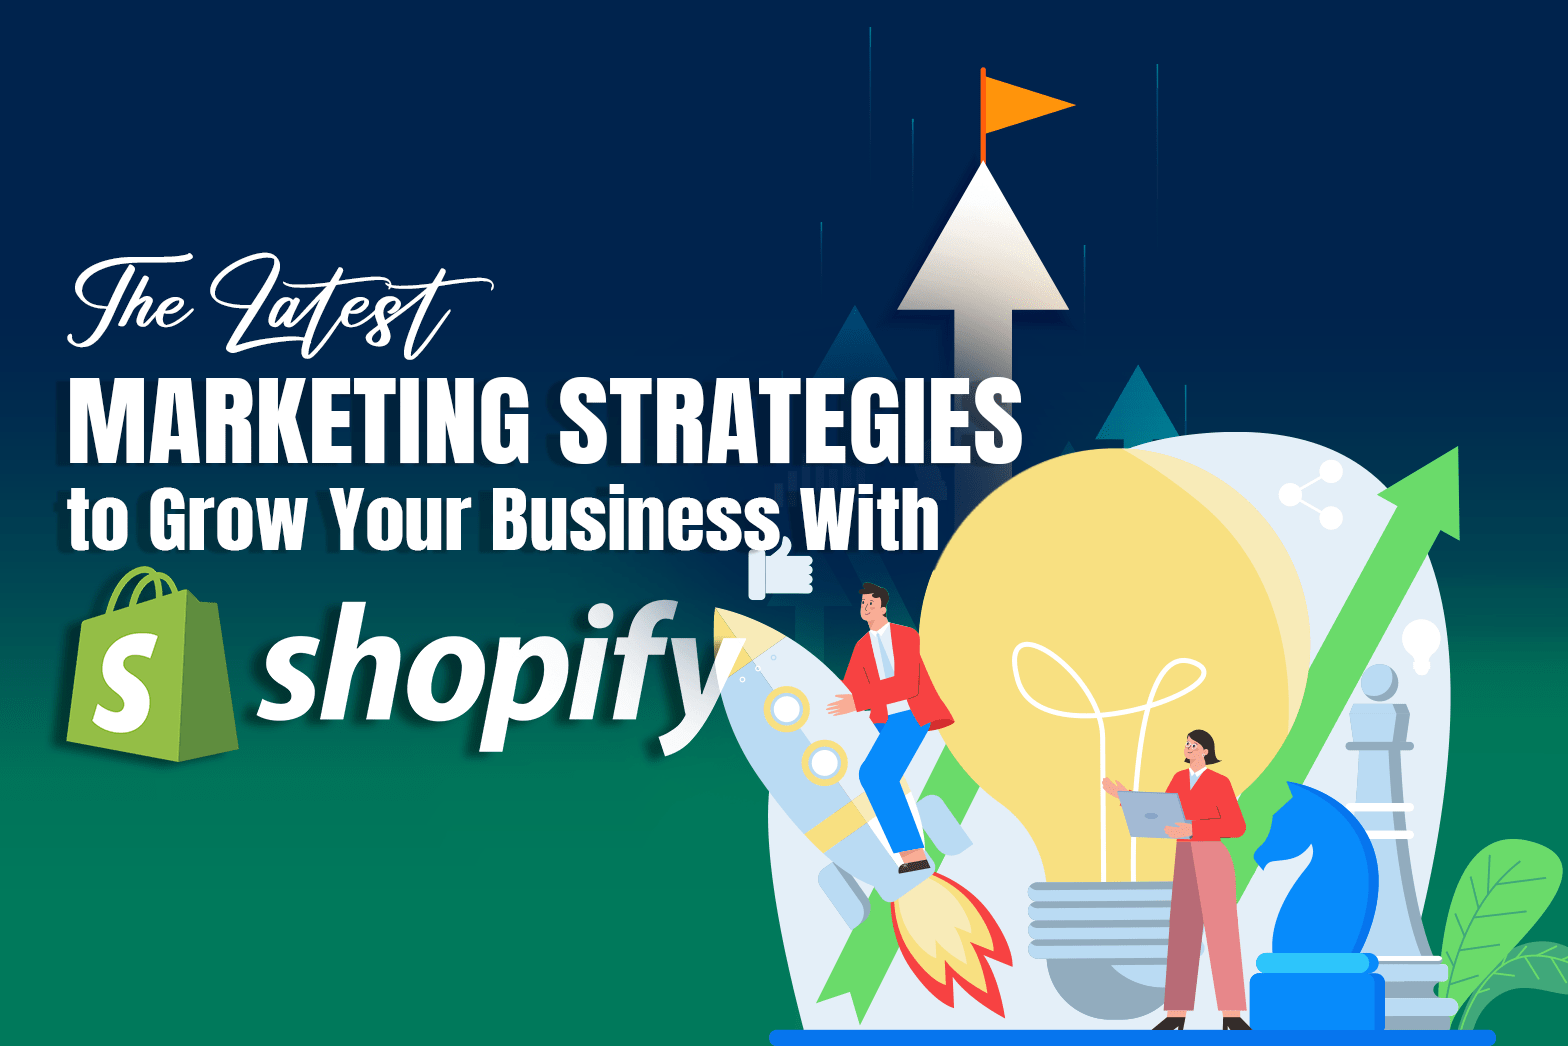 The Latest Marketing Strategies to Grow Your Business With Shopify